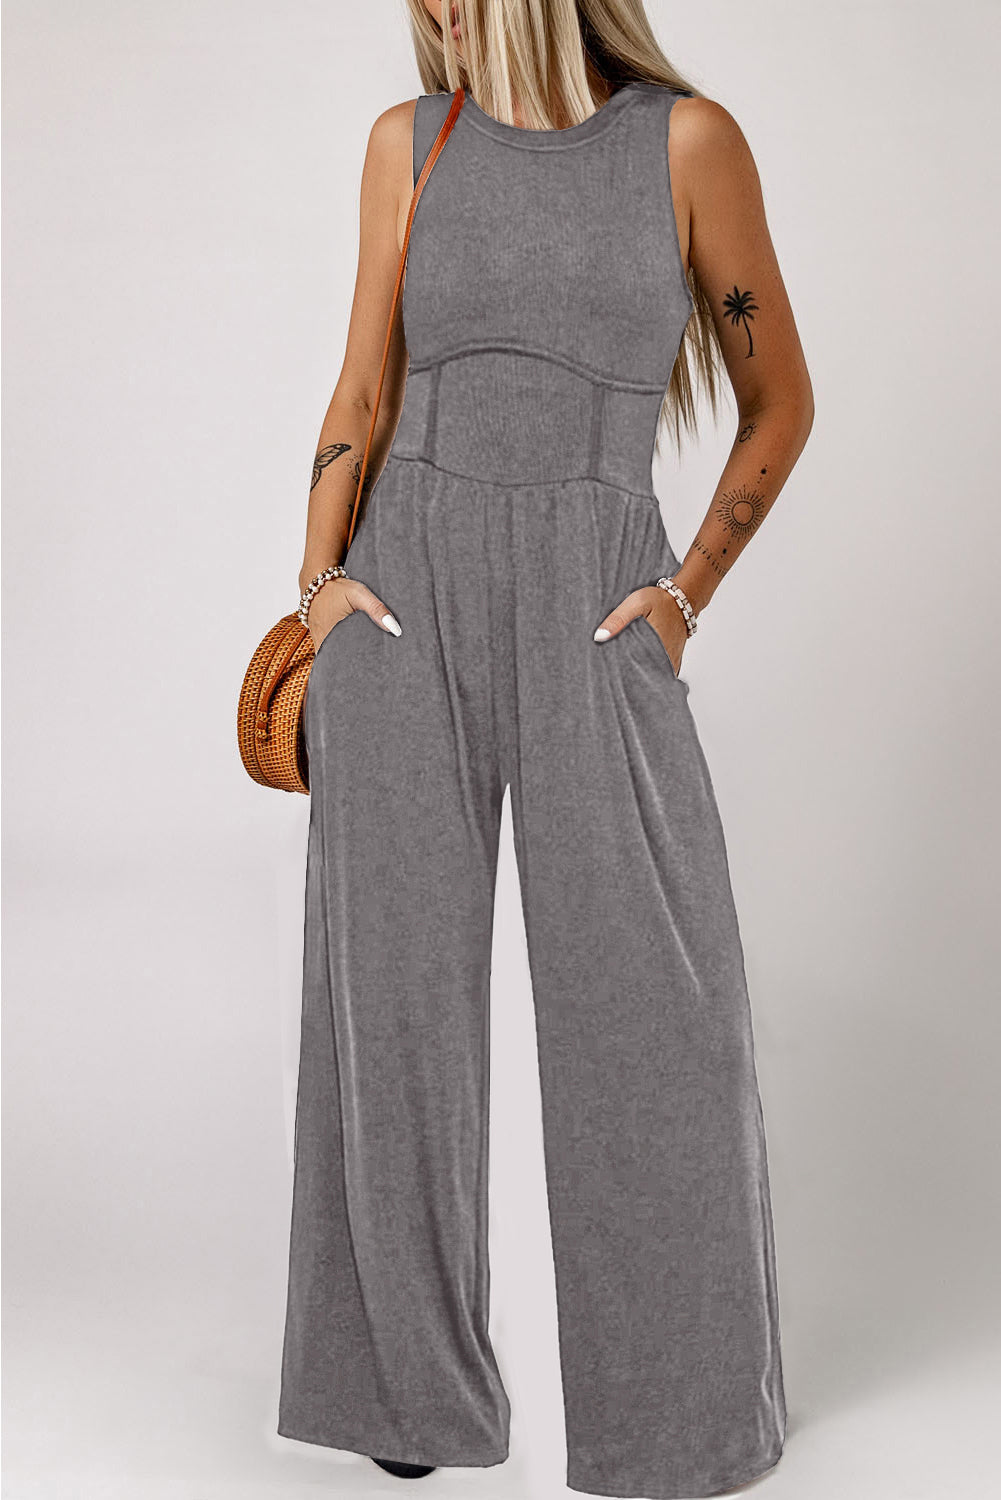 Womens Jumpsuit-Round Neck Sleeveless Jumpsuit with Pockets | jumpsuit